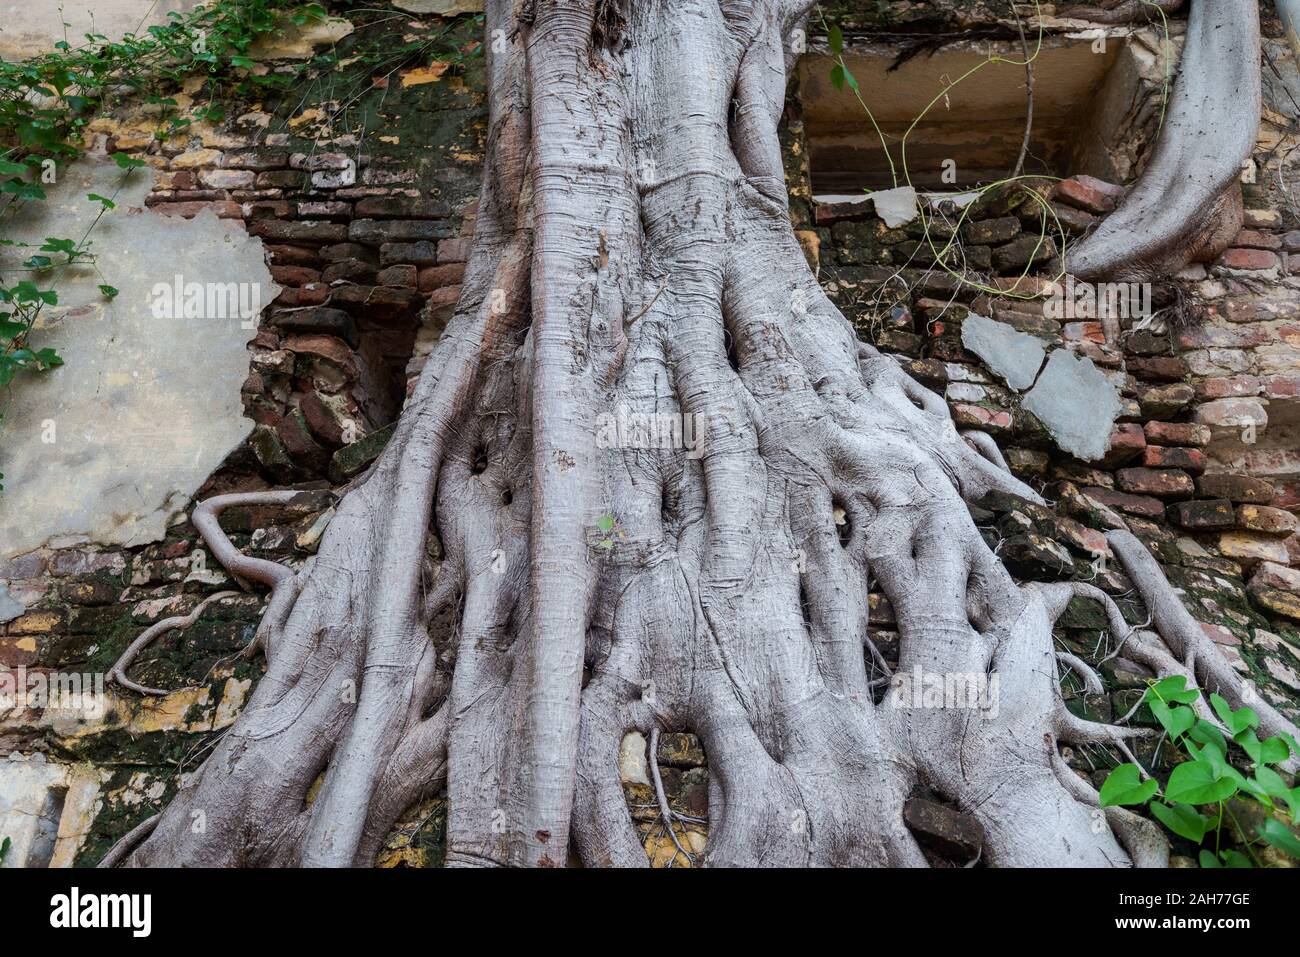 Detail of roots of big Banyan tree ingrown in brick wall in Puducherry, South India Stock Photo